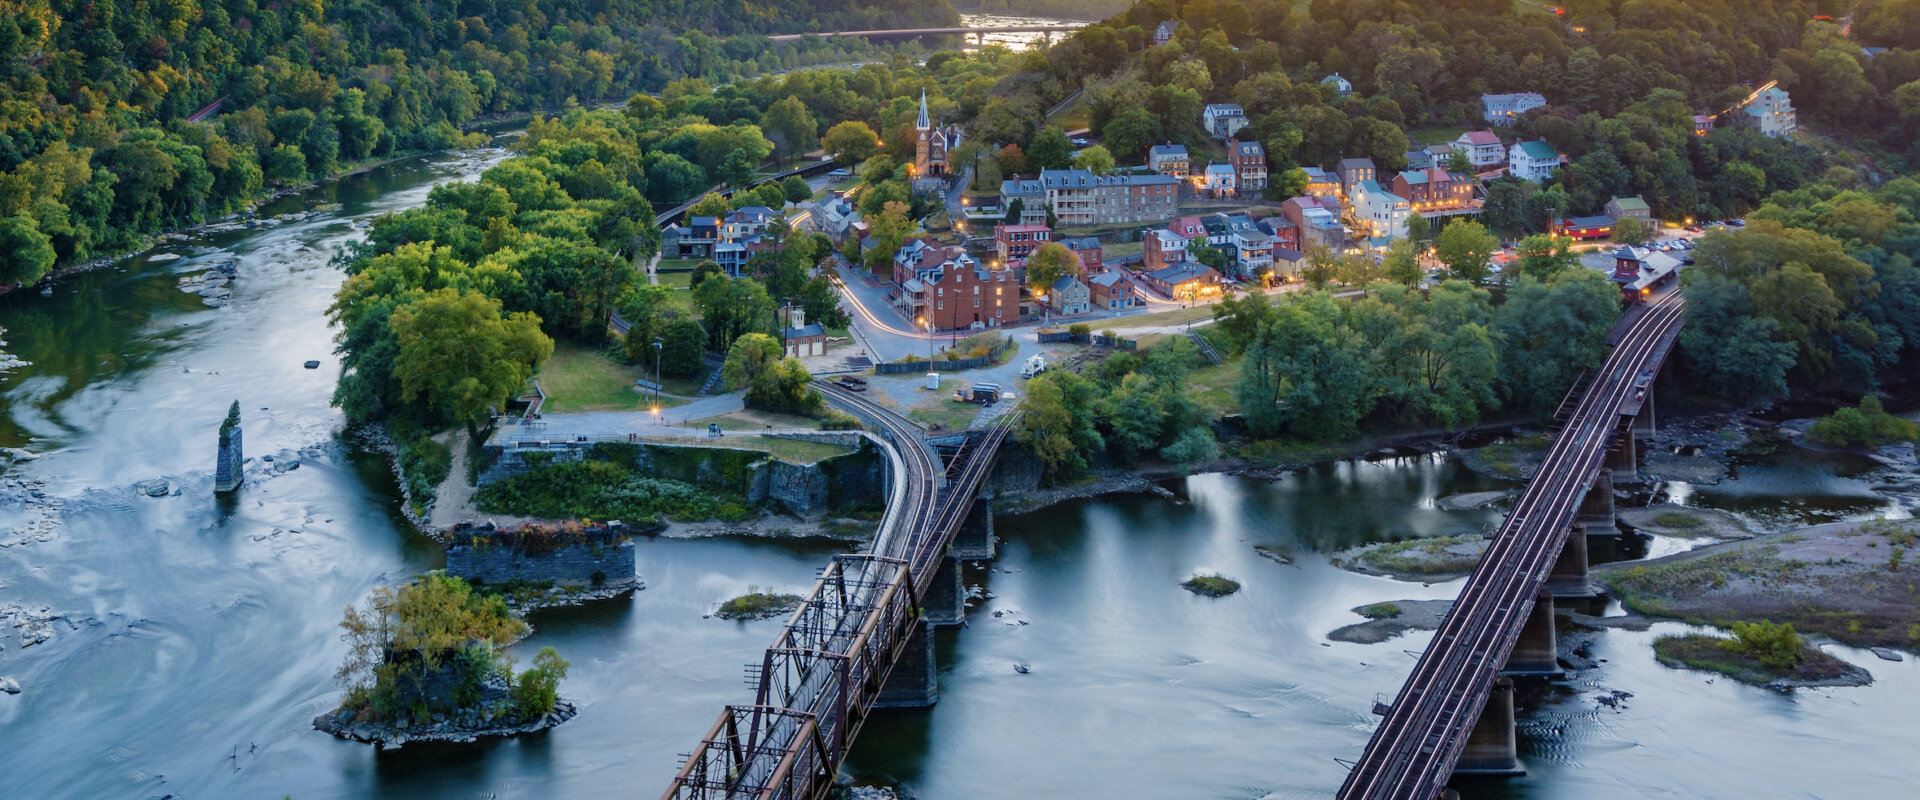 Sell My House Fast in Harpers Ferry